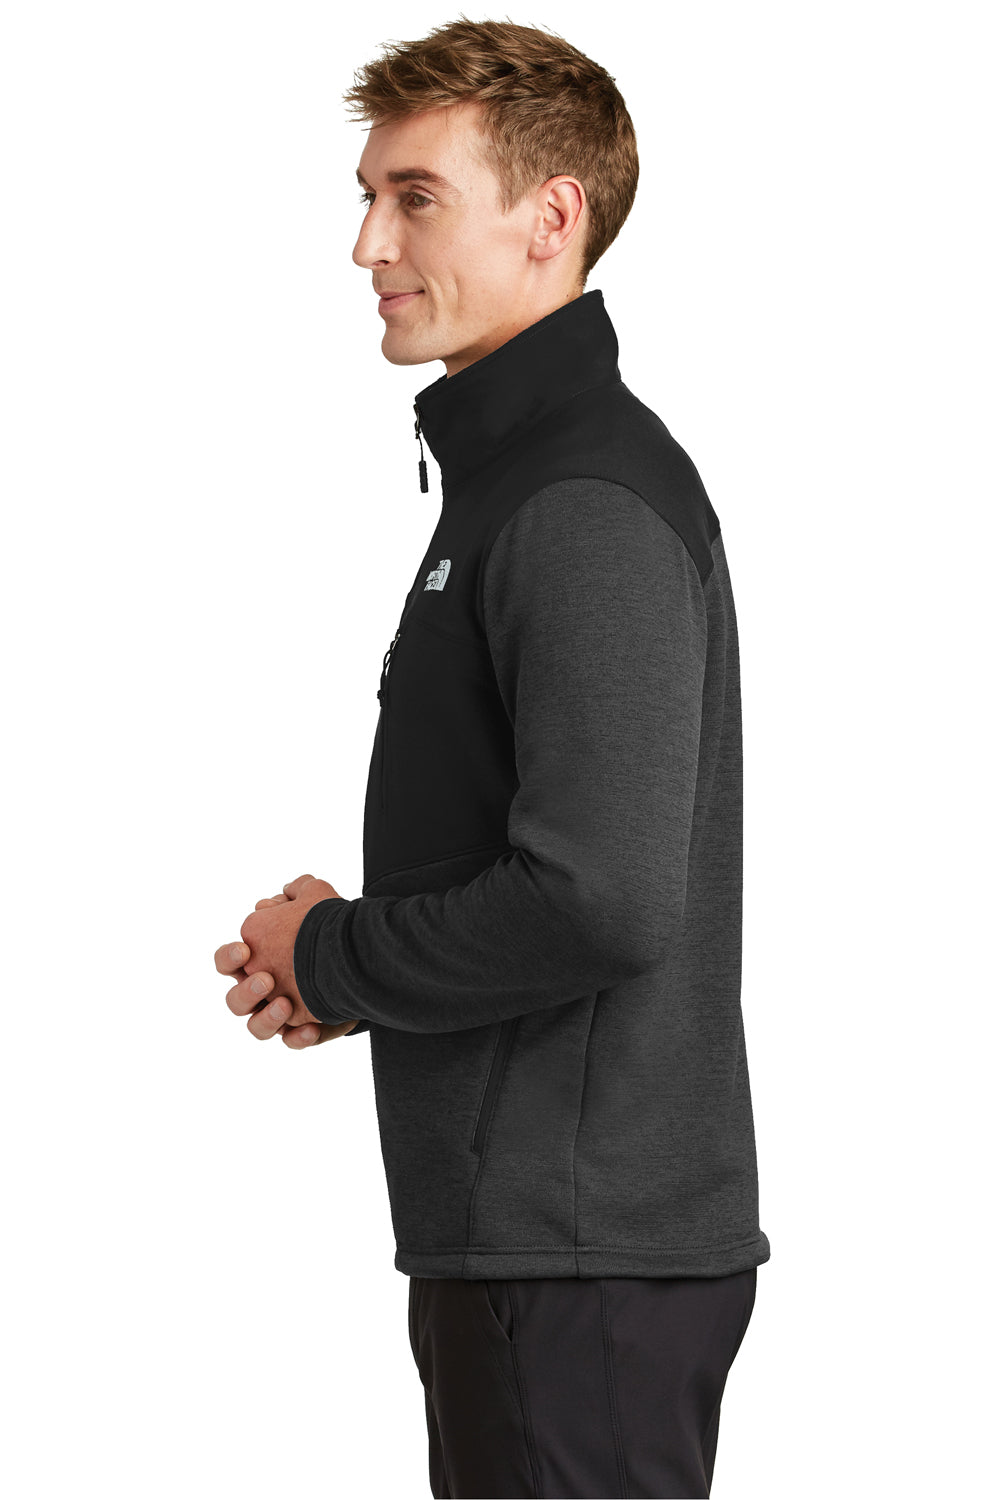 The North Face NF0A3LH6 Mens Far North Wind Resistant Full Zip Fleece Jacket Heather Black Side